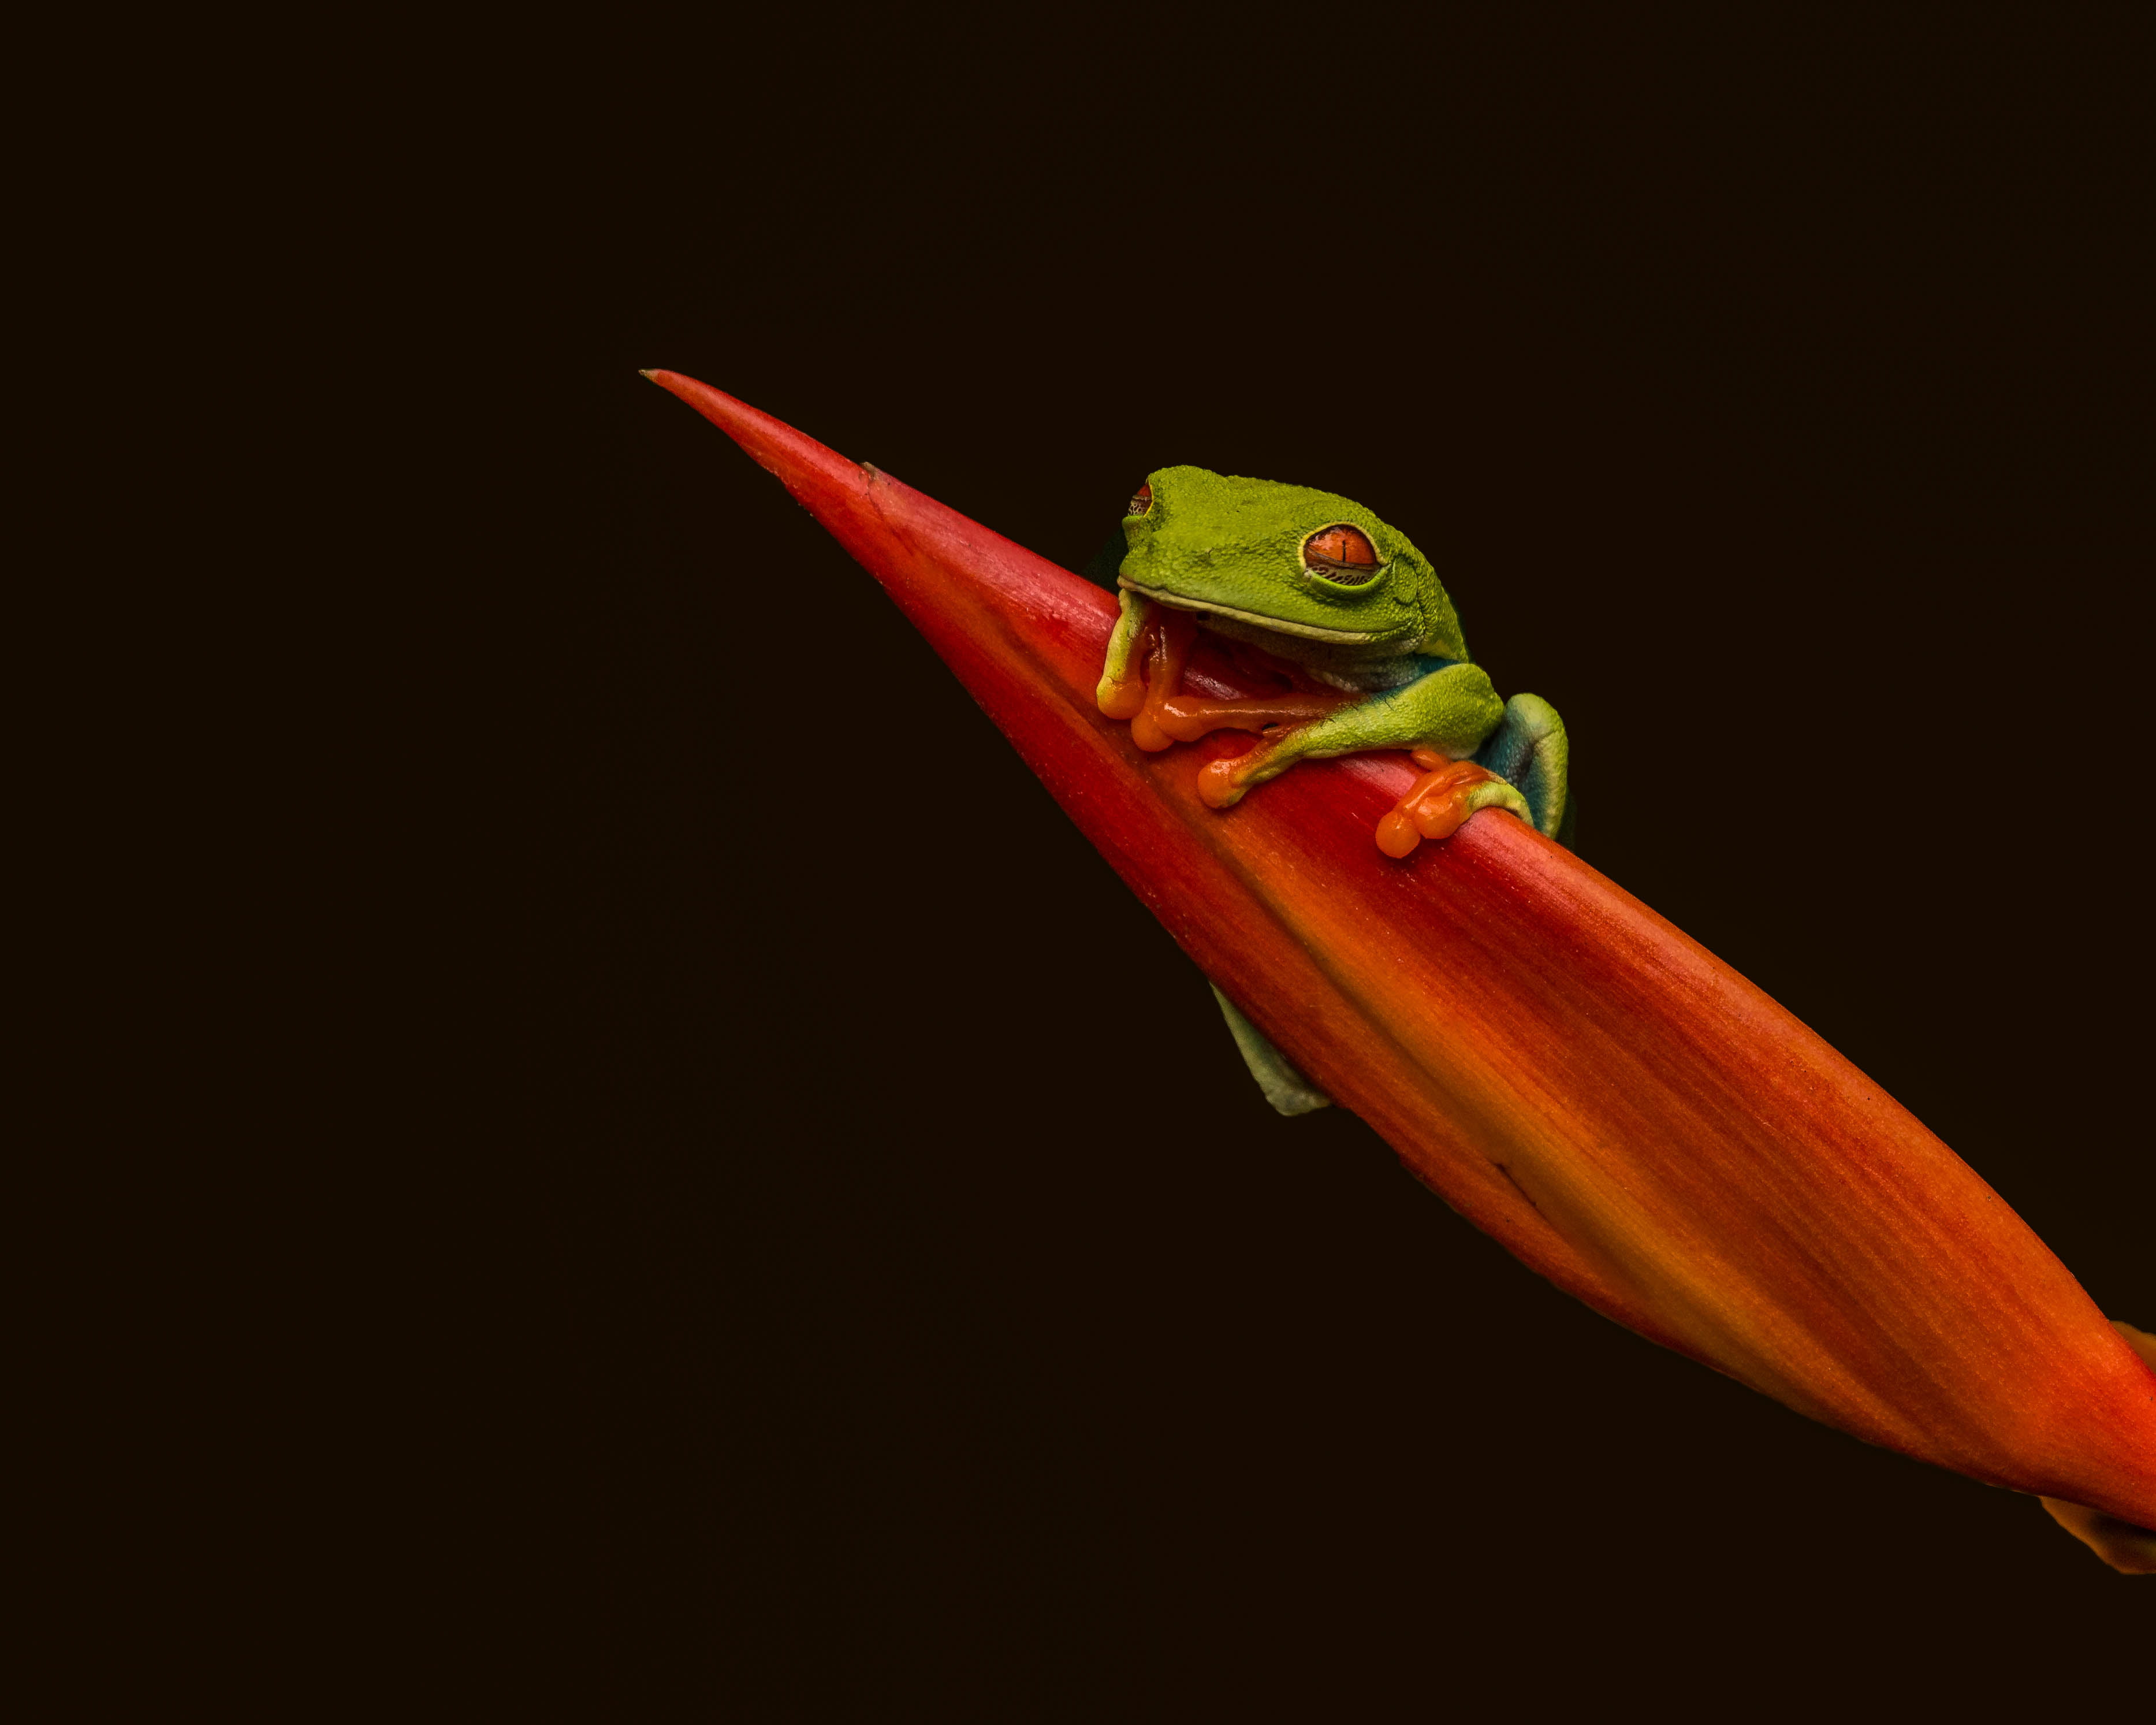 red-eyed green tree frog on red plant, red-eyed tree frog, red-eyed tree frog